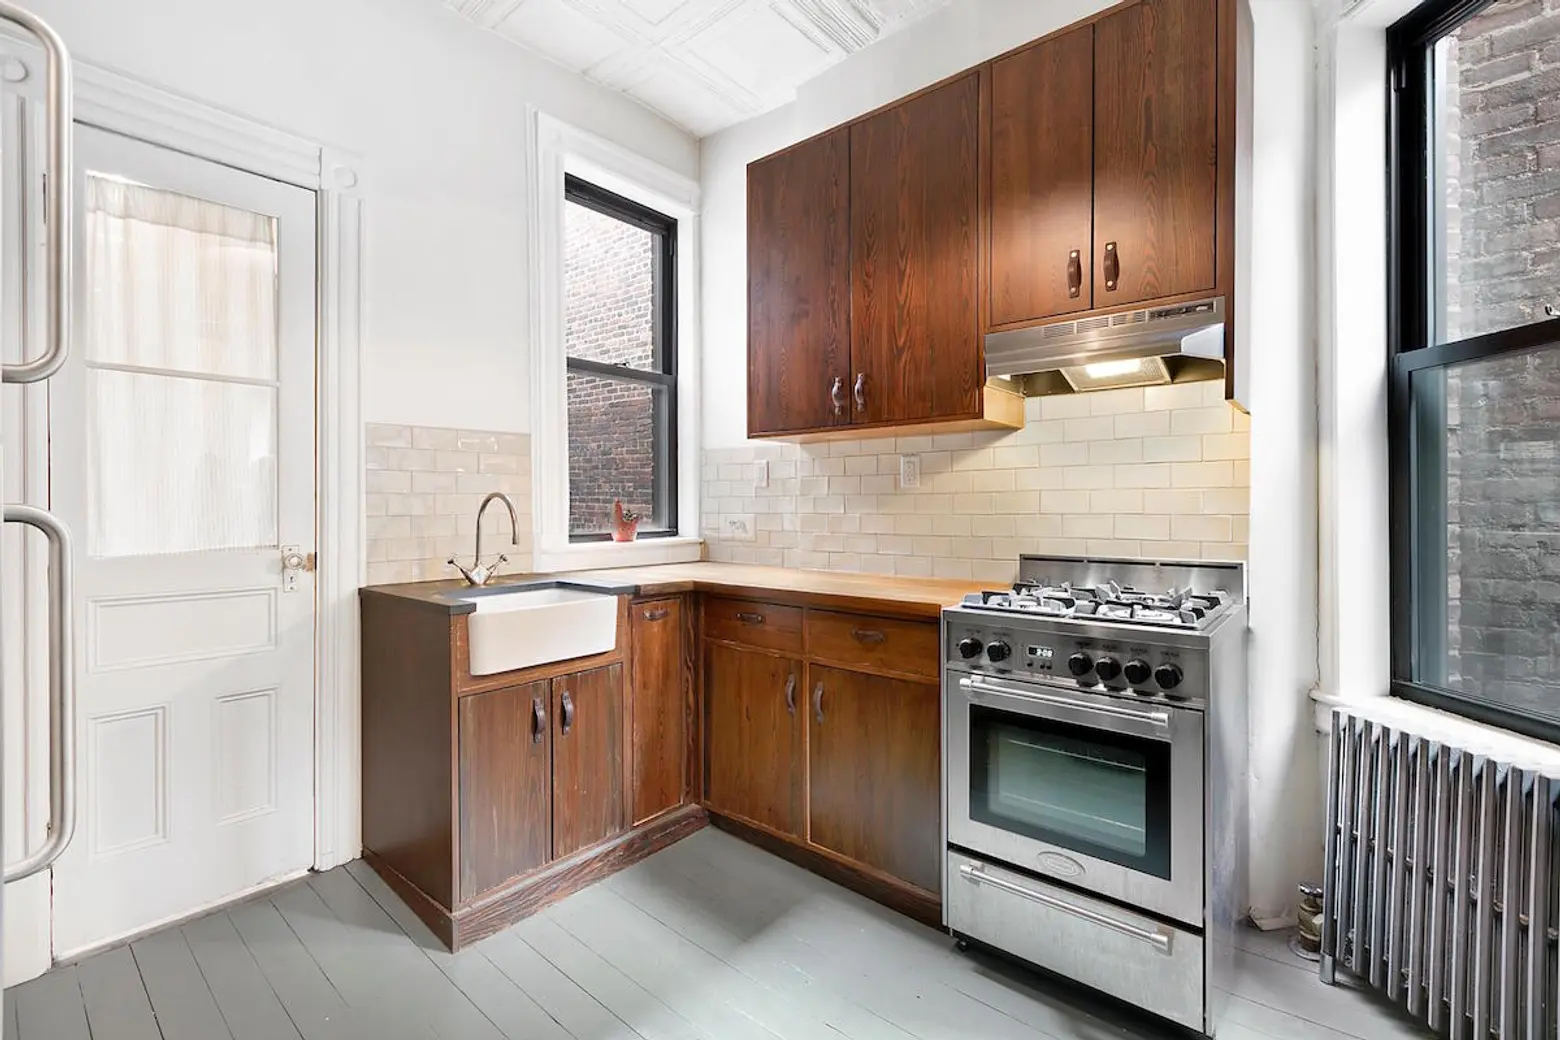 78 Charles Street, West village, cool listings, co-ops